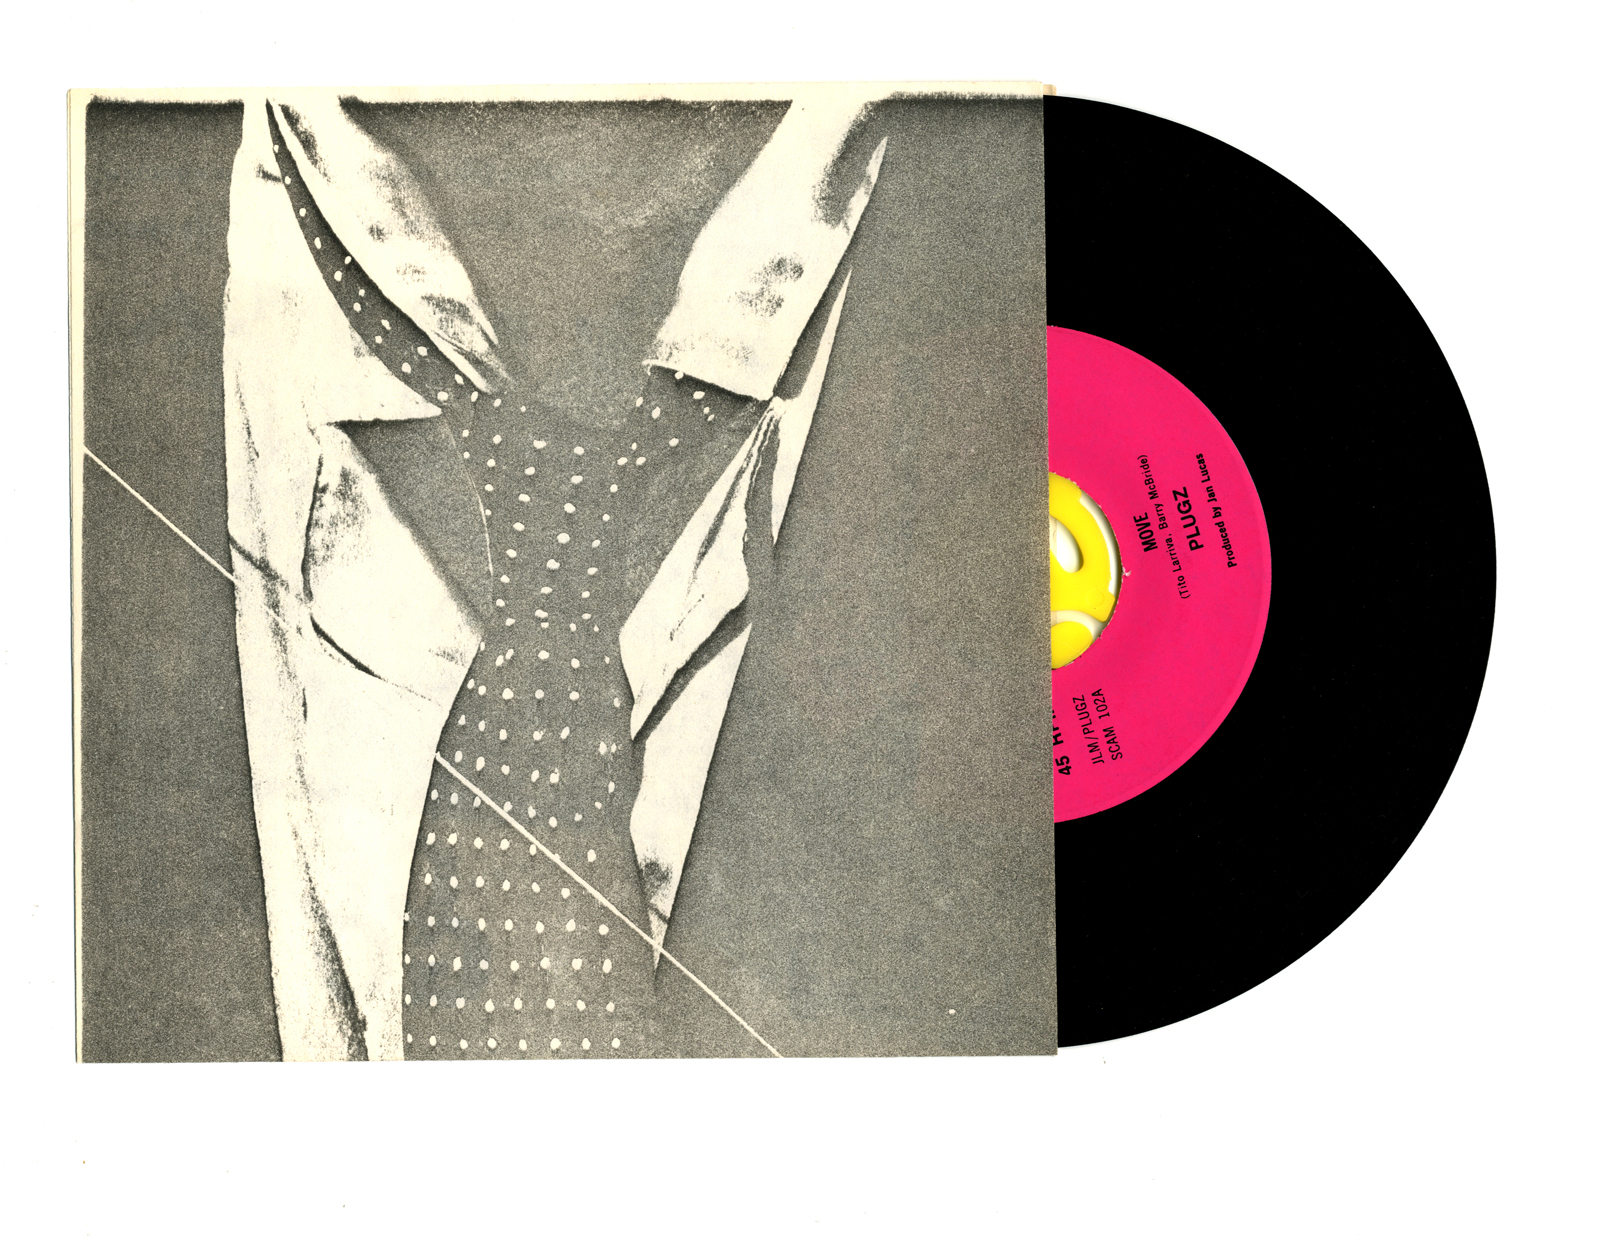  Plugs ‘Move’ 7” Single - Tie Cover - Front and Back